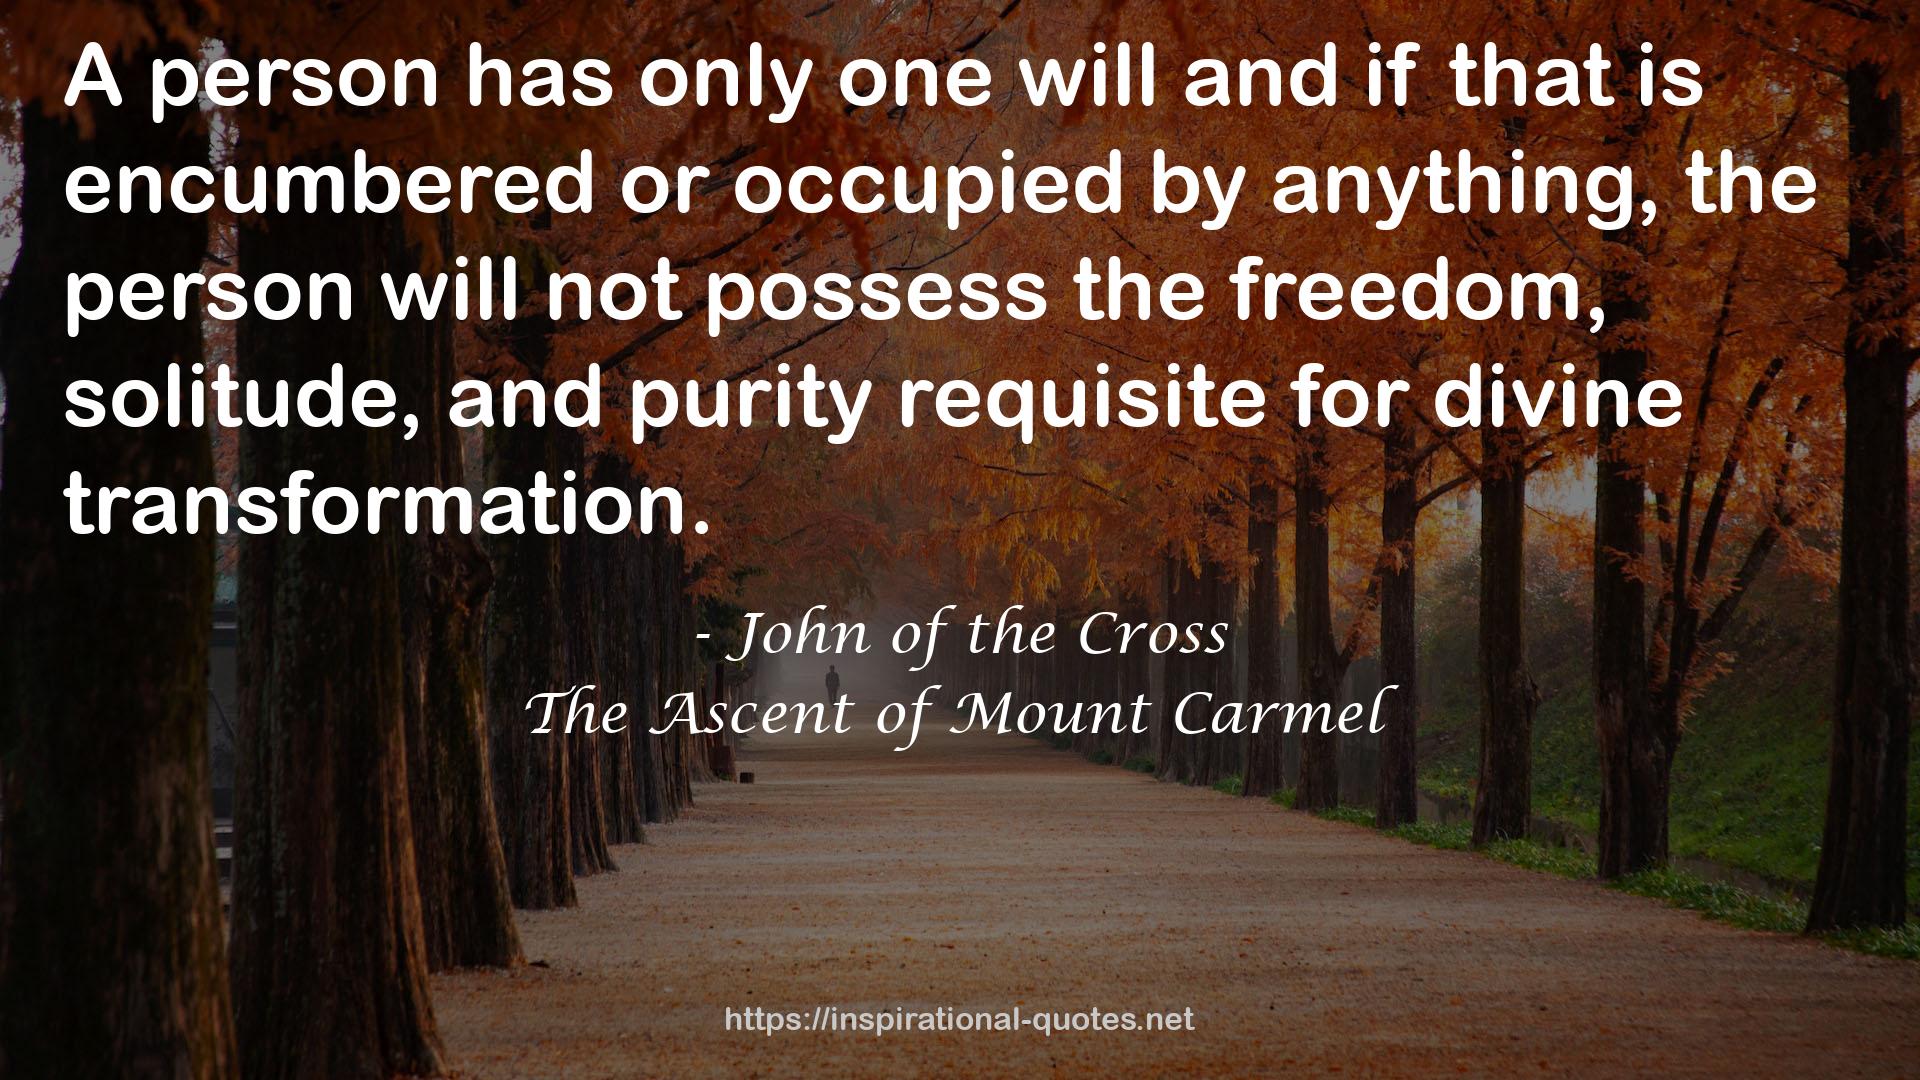 The Ascent of Mount Carmel QUOTES